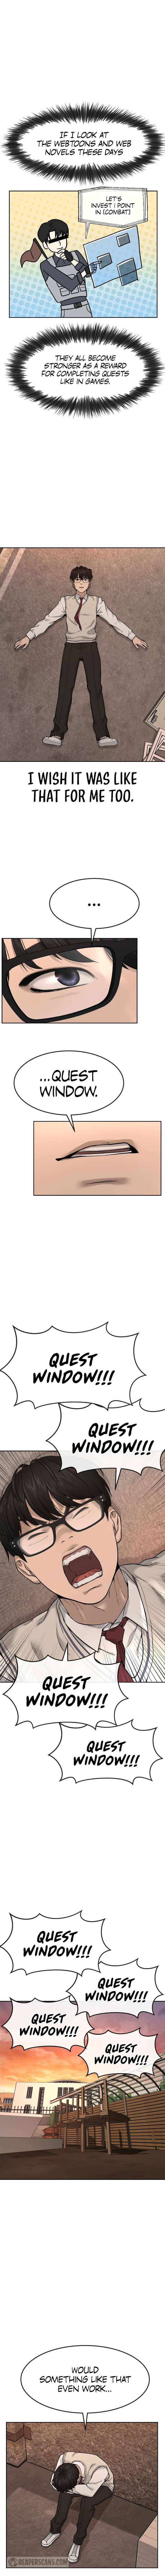 Quest Supremacy Chapter 1 page 4 - MangaWeebs.in